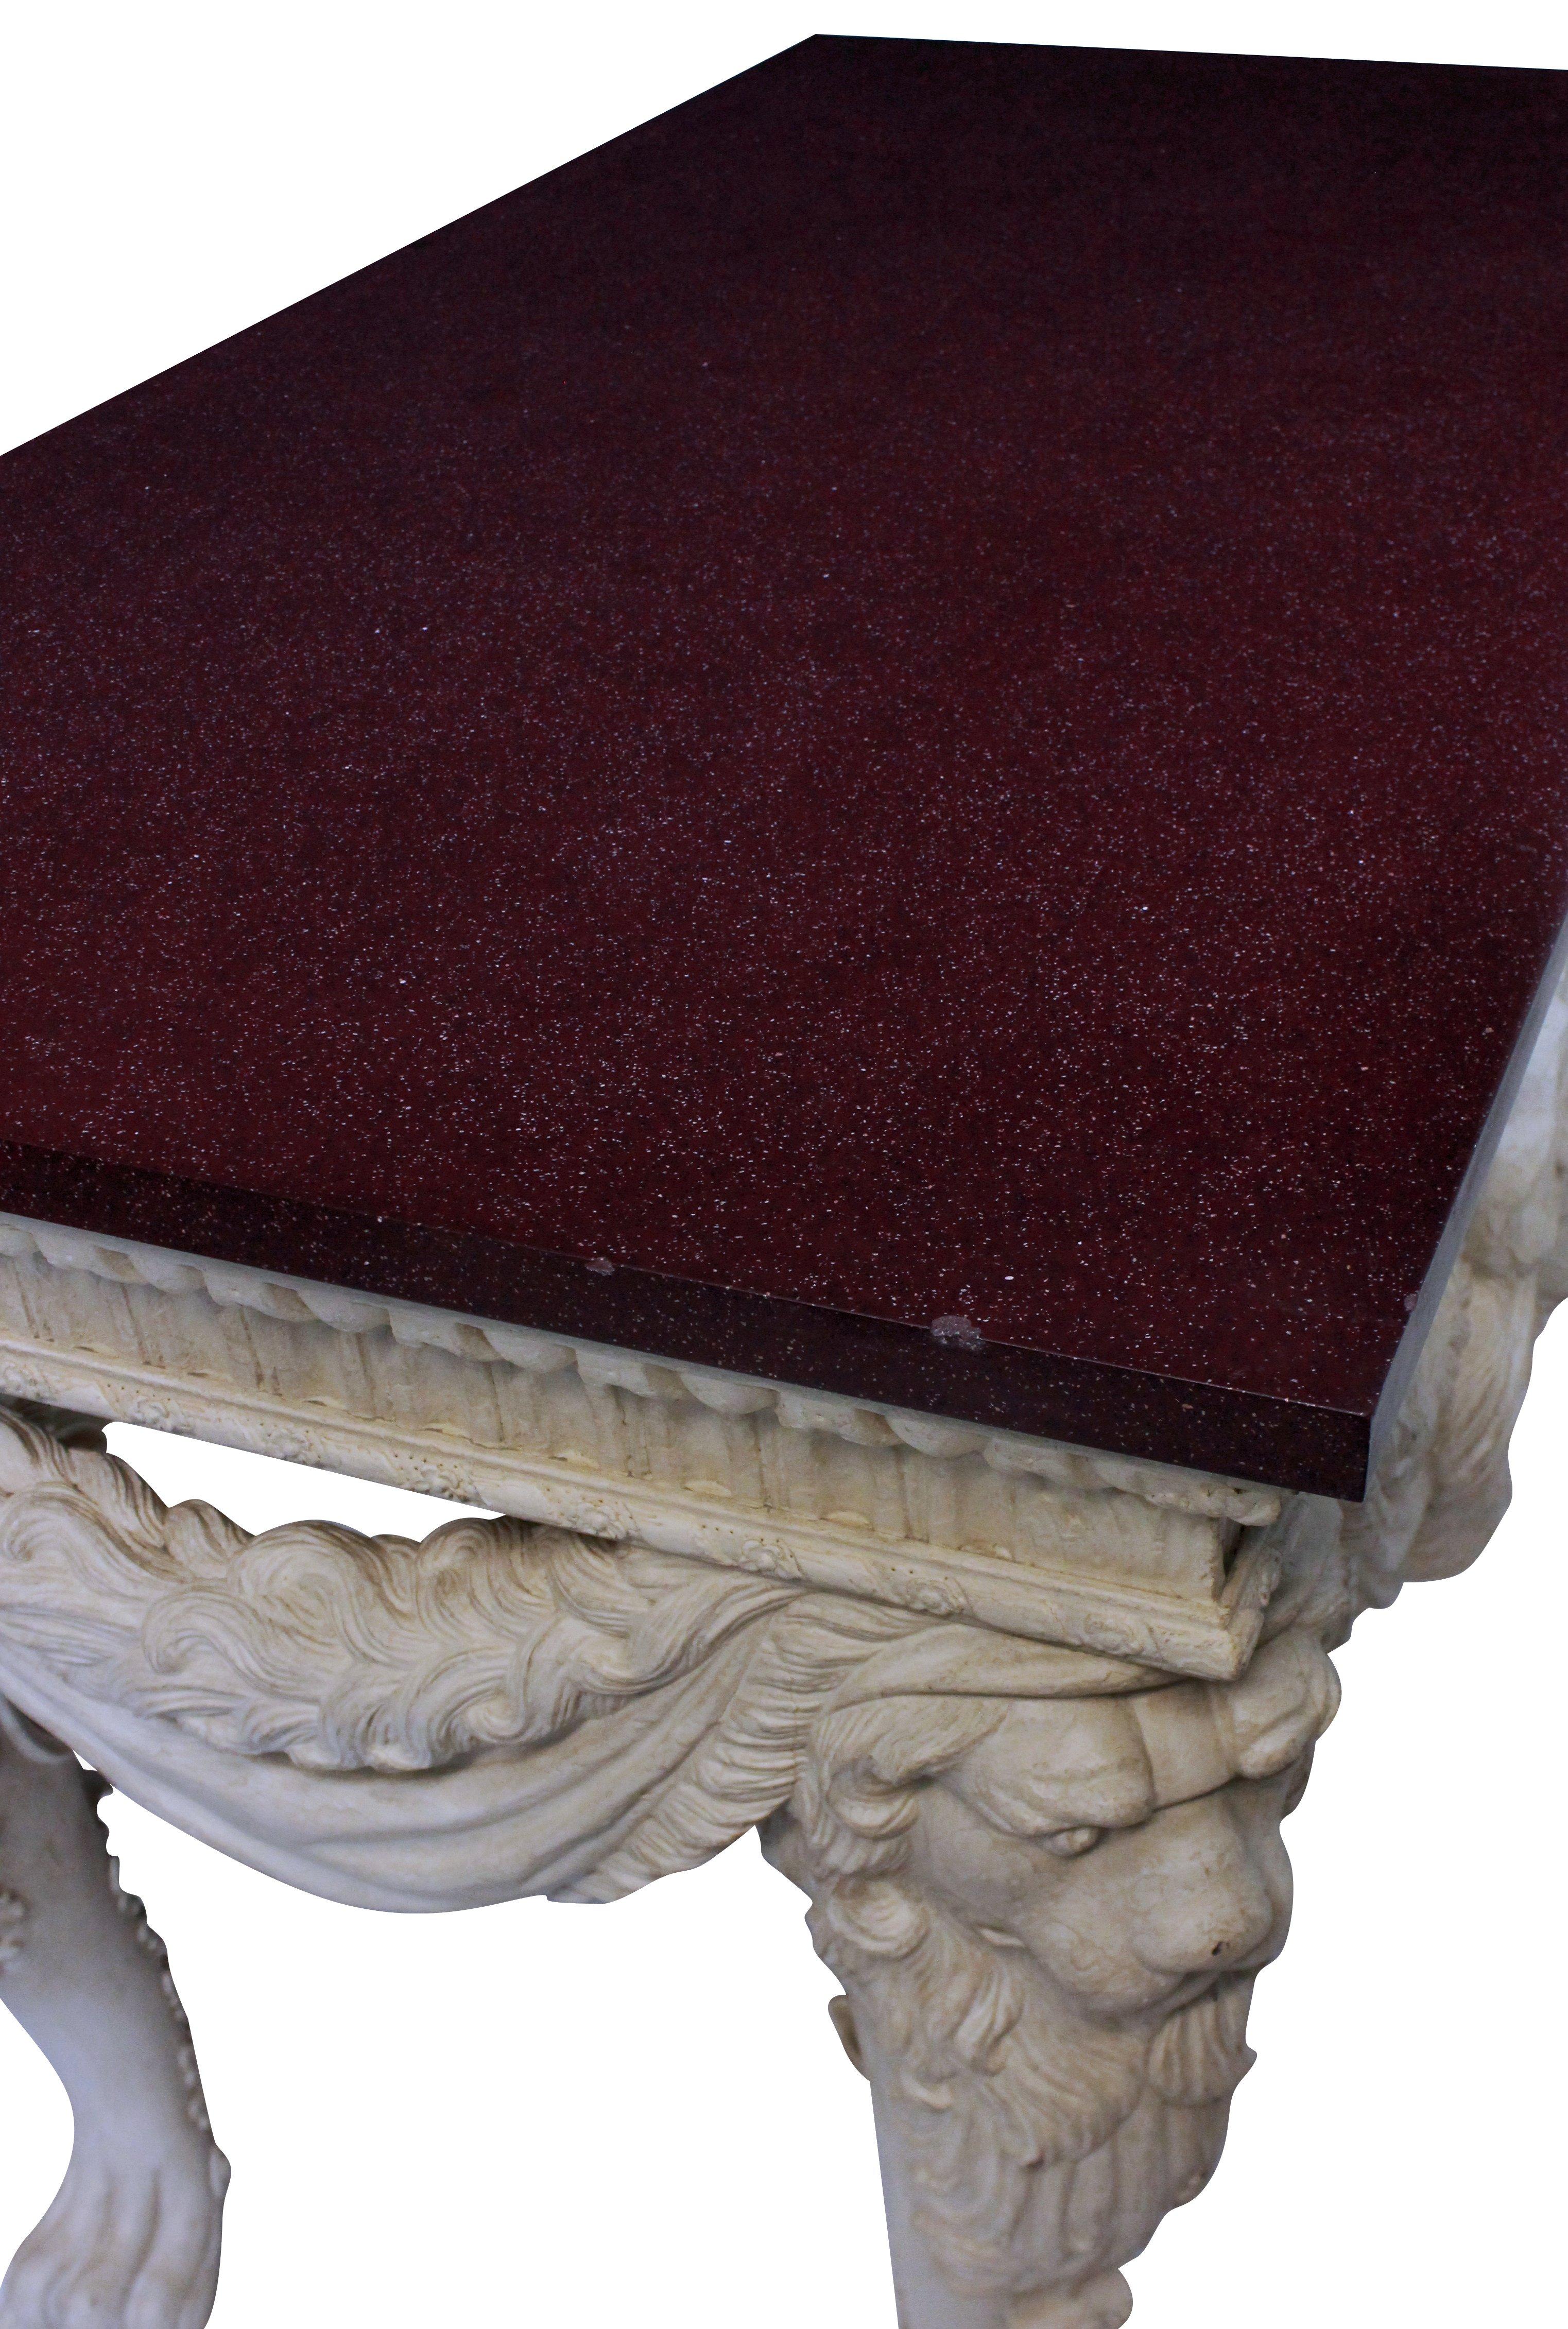 Neoclassical English County House Console Table with a Solid Porphyry Top